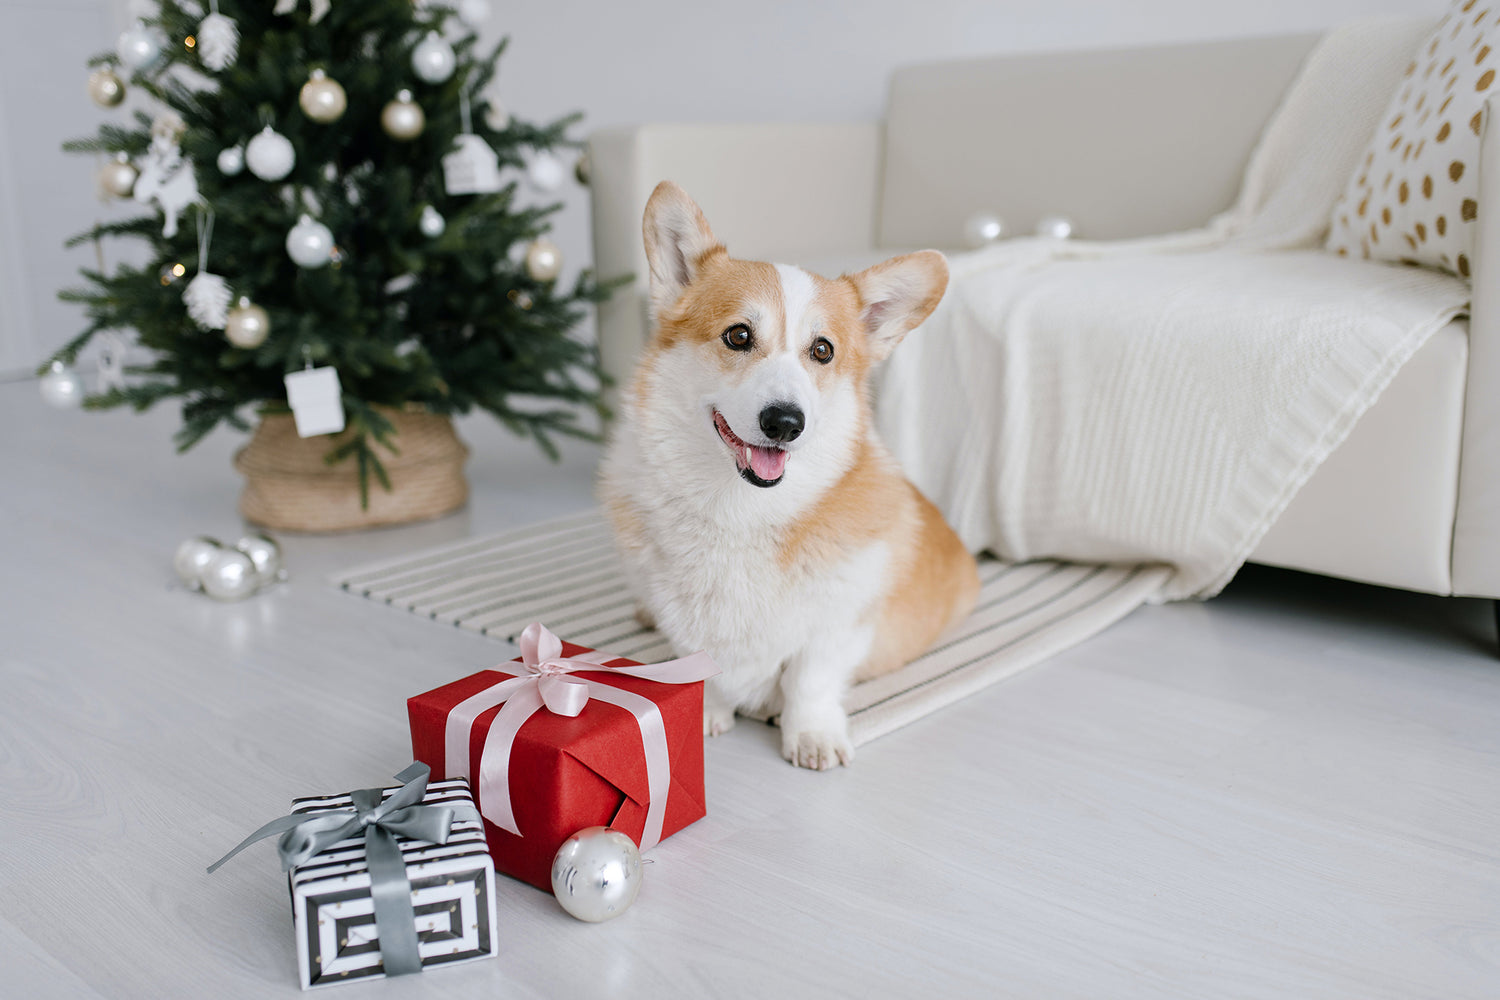 Ultimate Holiday Gift Guide for Dog Owners: The Best Christmas Gifts for Dogs by Personality Type